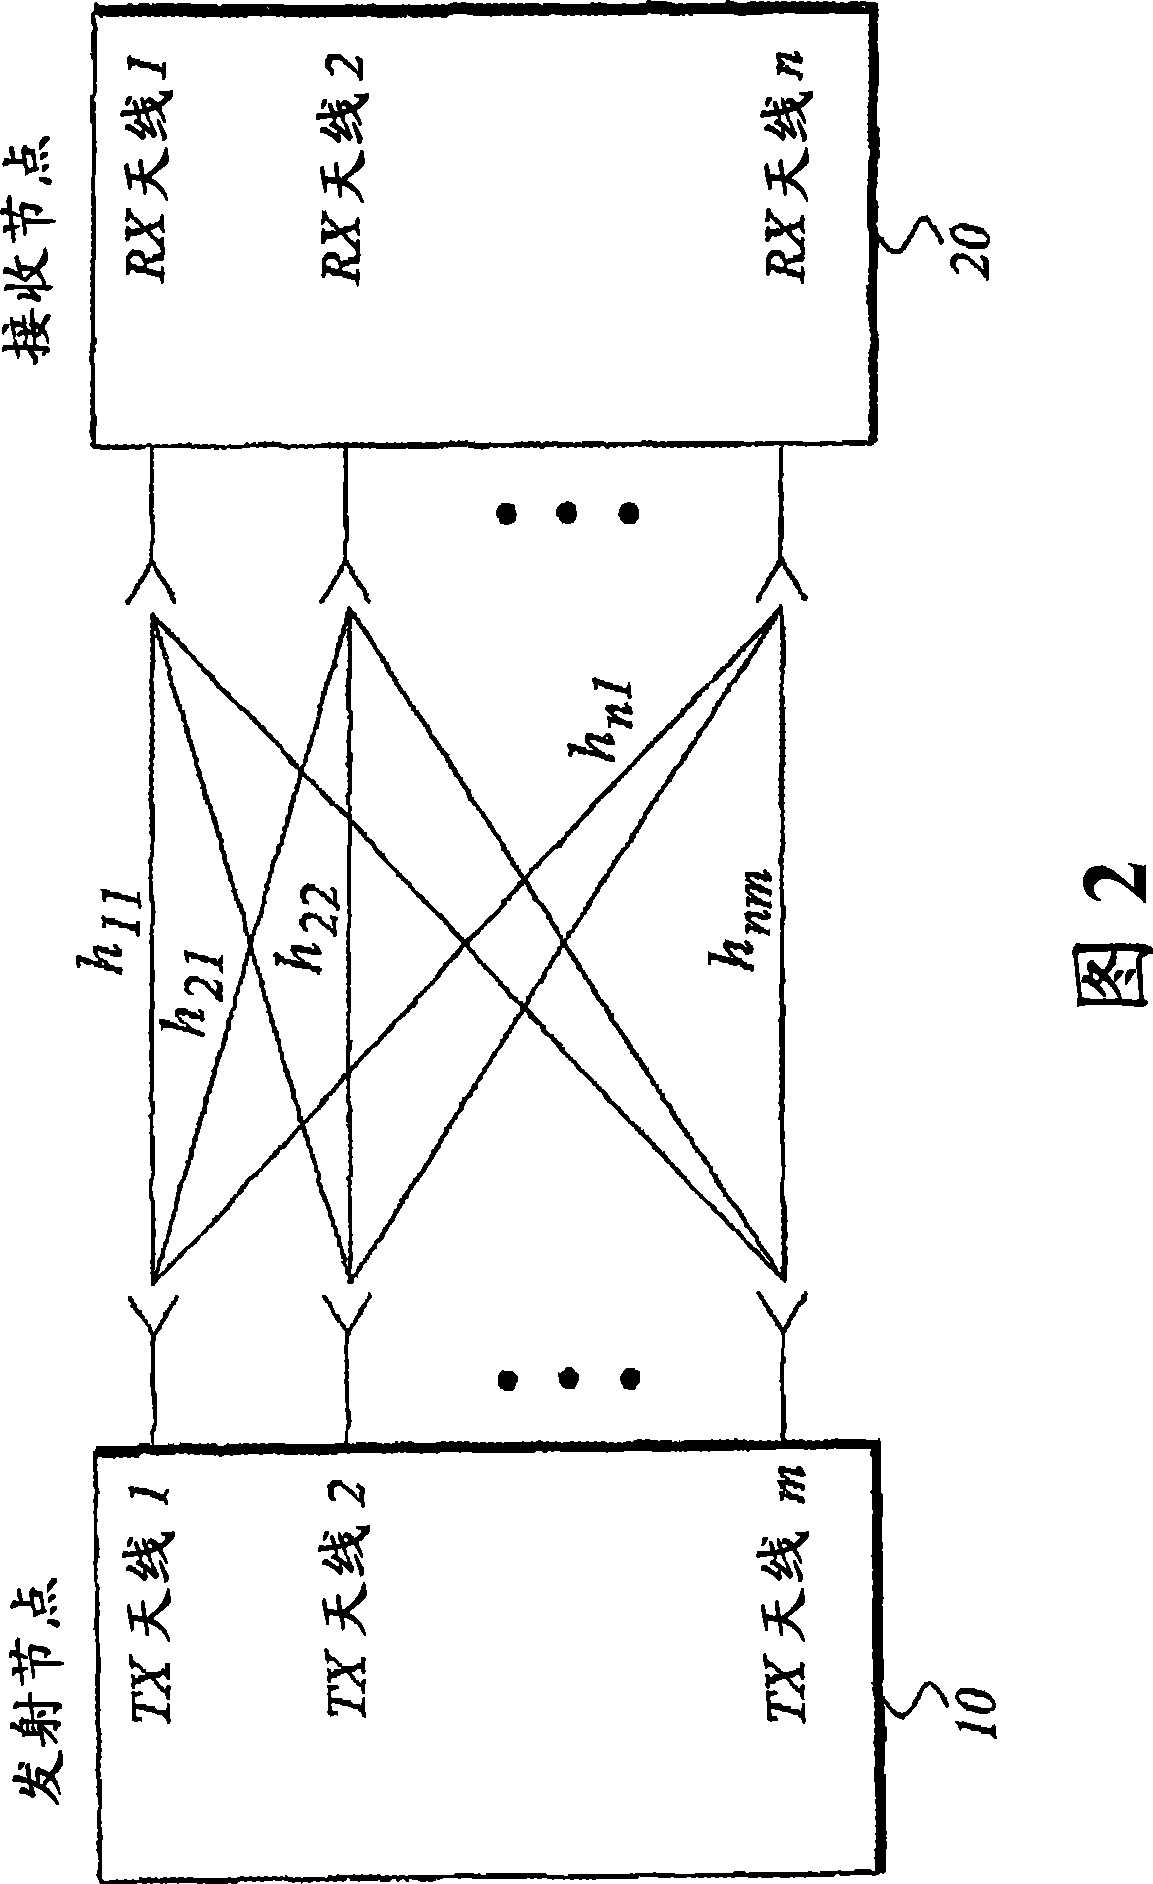 Power control in a wireless system having multiple interfering communication resources